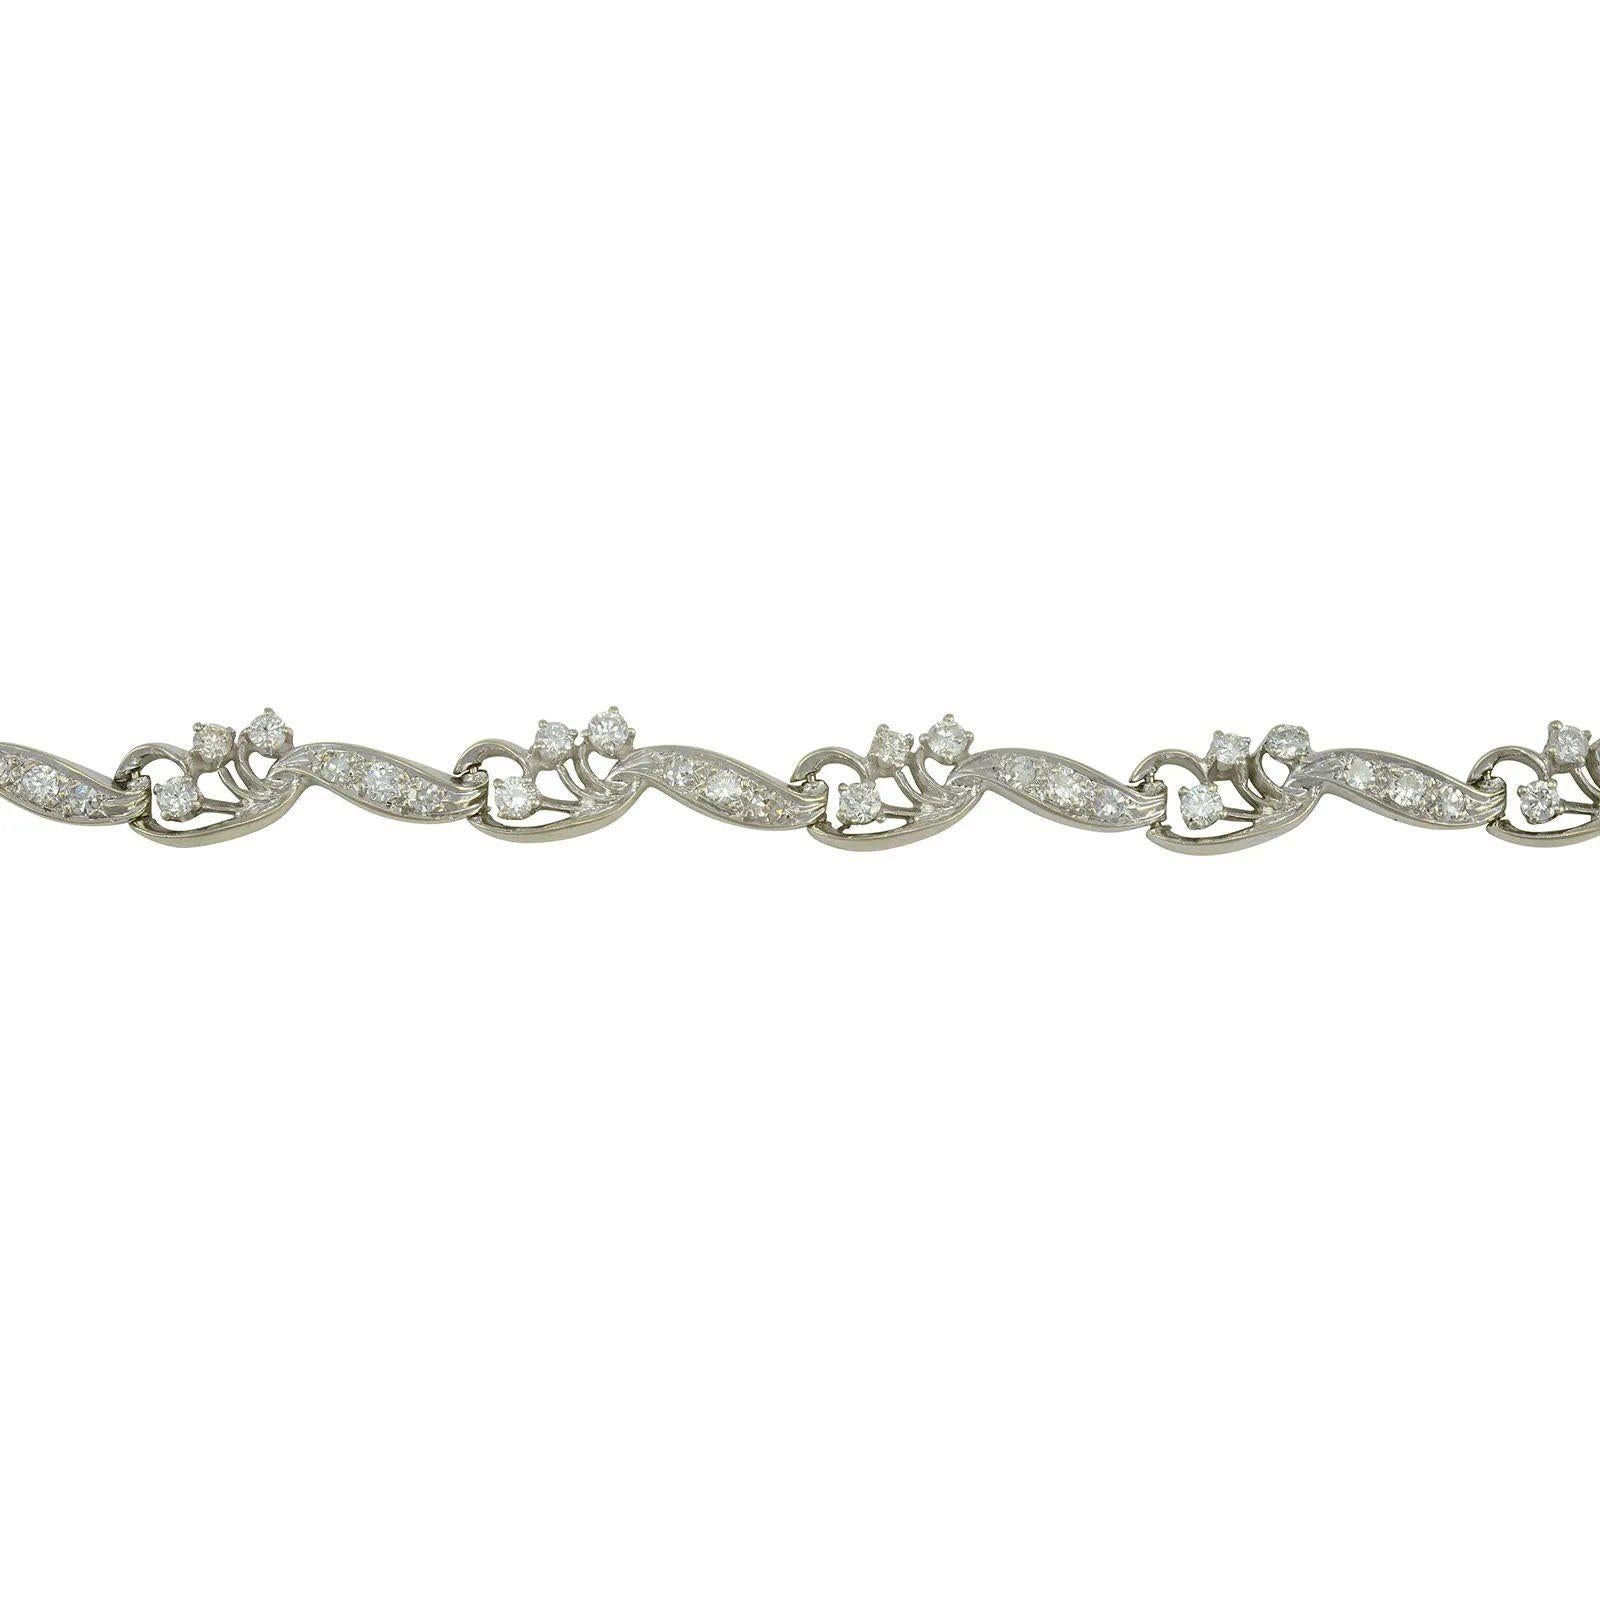 Estate 1.91 CTW diamond bracelet marked Kahn. This 14 karat white gold bracelet has 54 diamonds at 1.91 CTW with VS2-SI2 clarity and G-I color. This white gold diamond bracelet has makers mark of Kahn.Dimensions6-7/8″ length